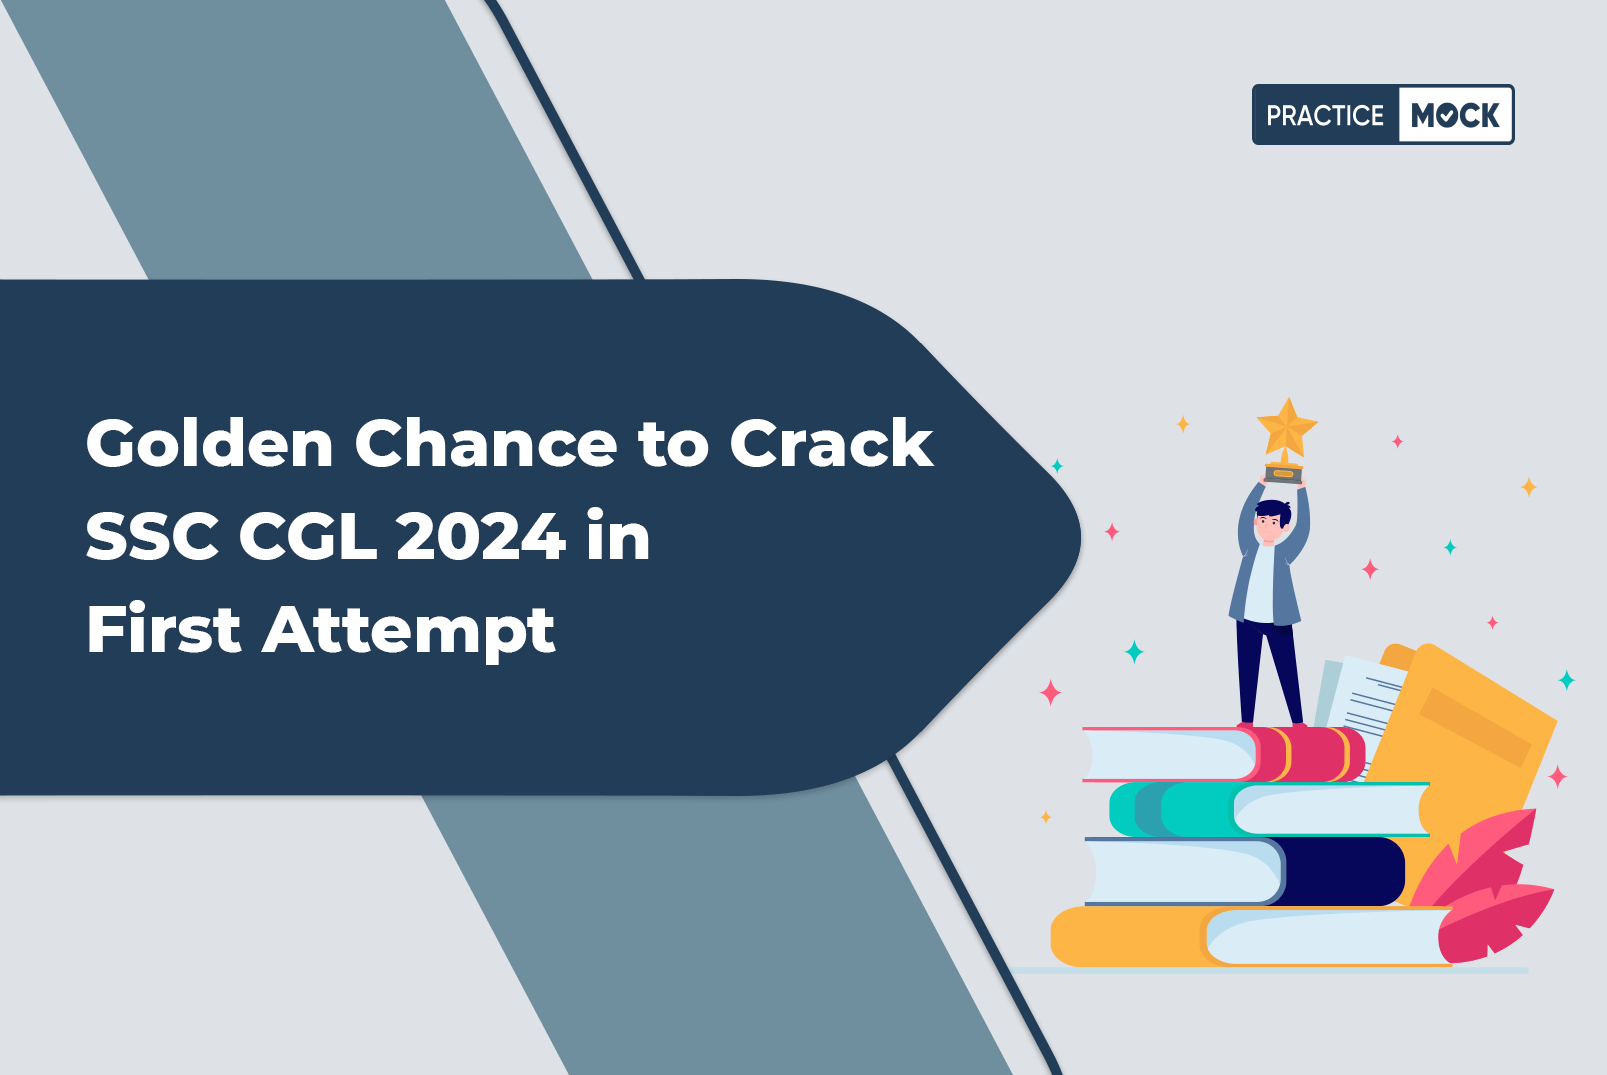 Golden Chance to Crack SSC CGL 2024 in First Attempt